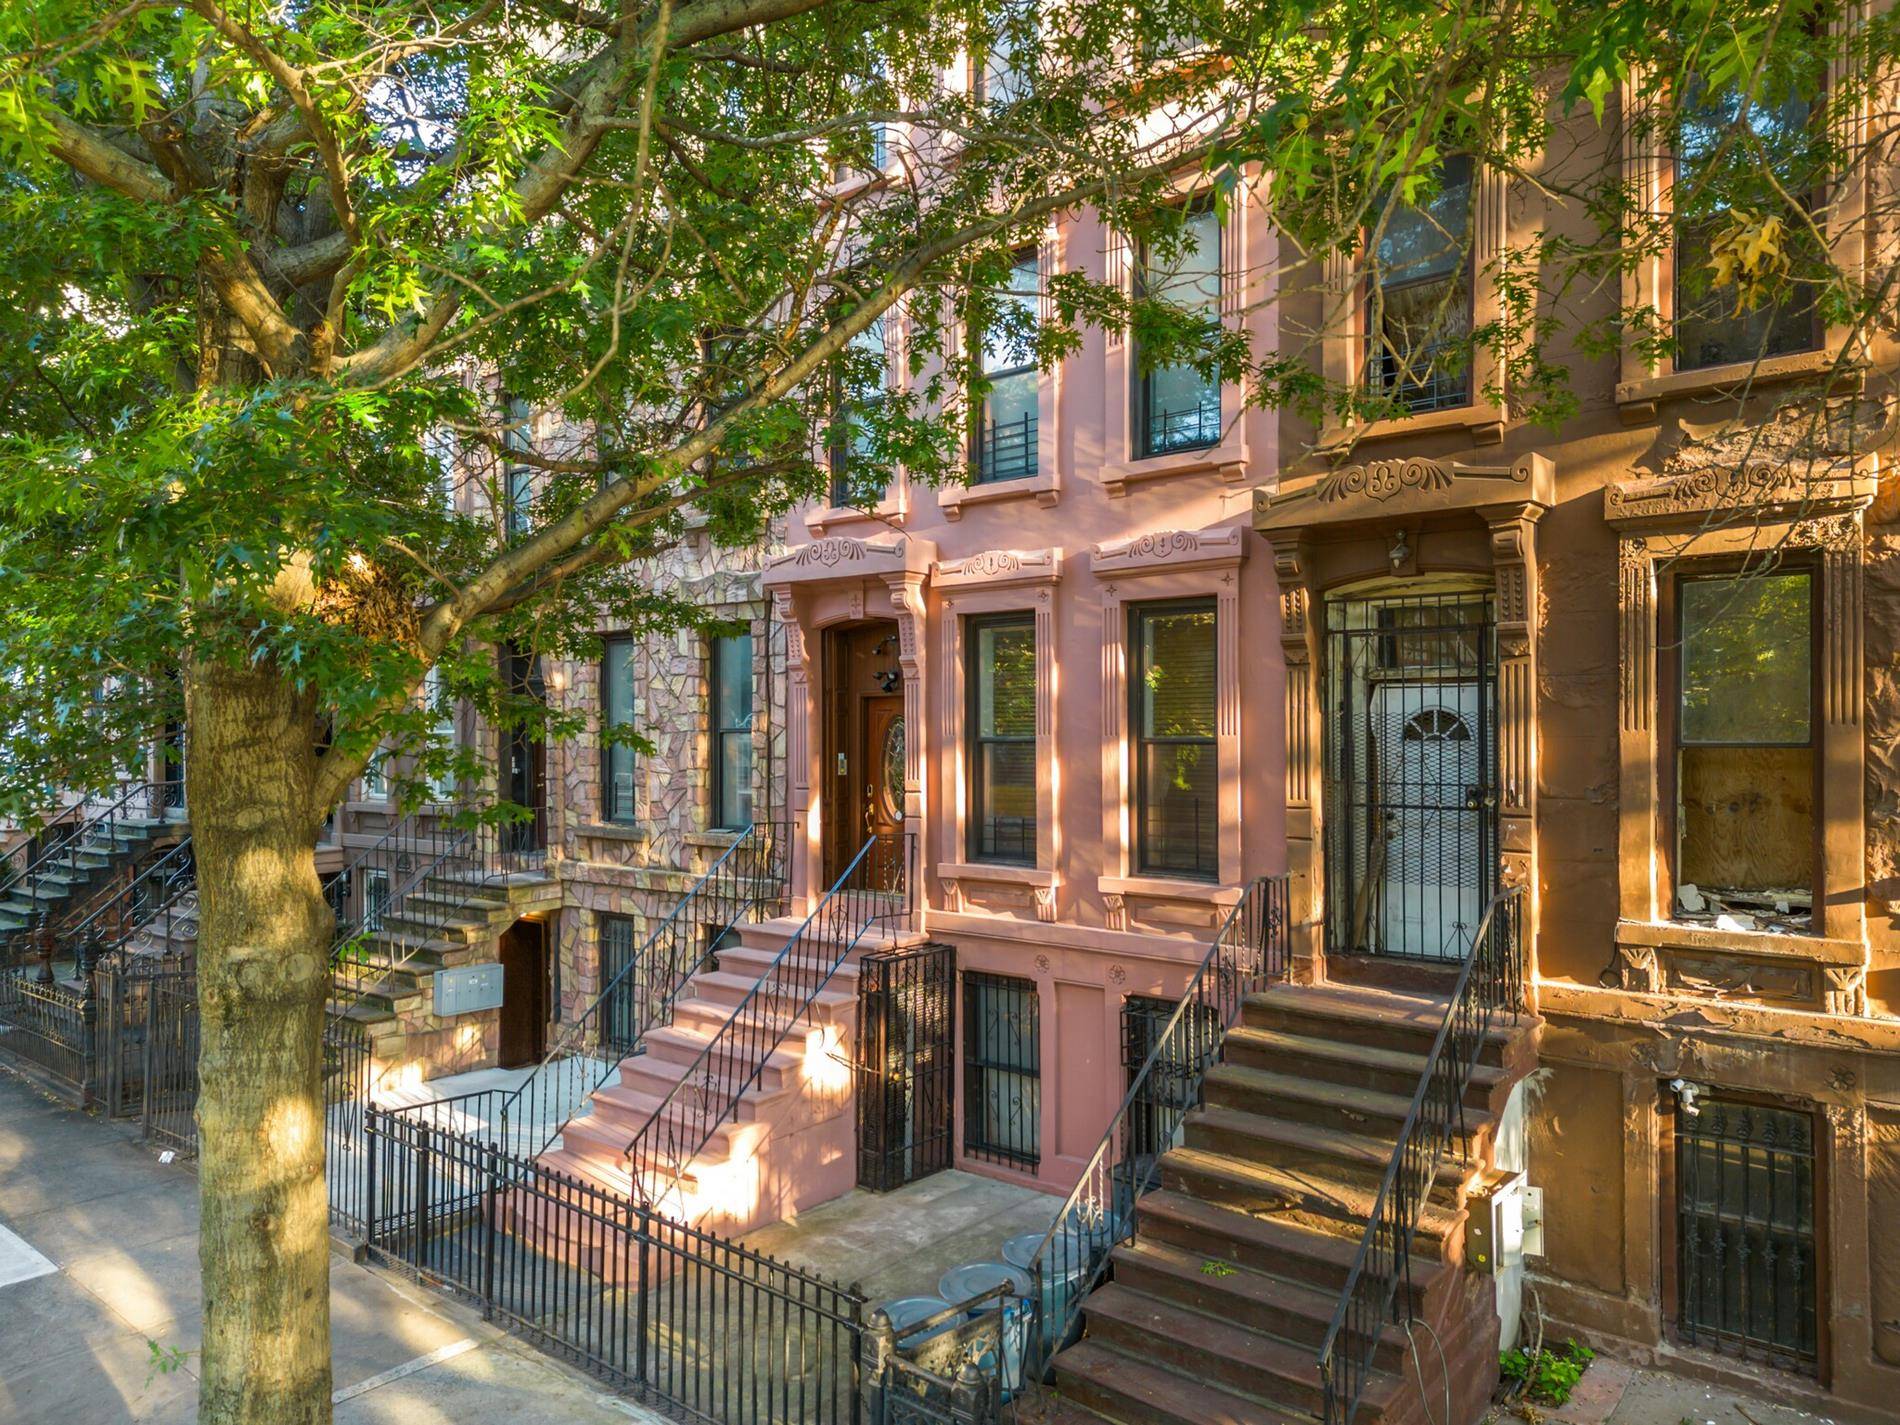 A quintessential 19th century Brooklyn townhouse, four storied, four family with Certificate of Occupancy.